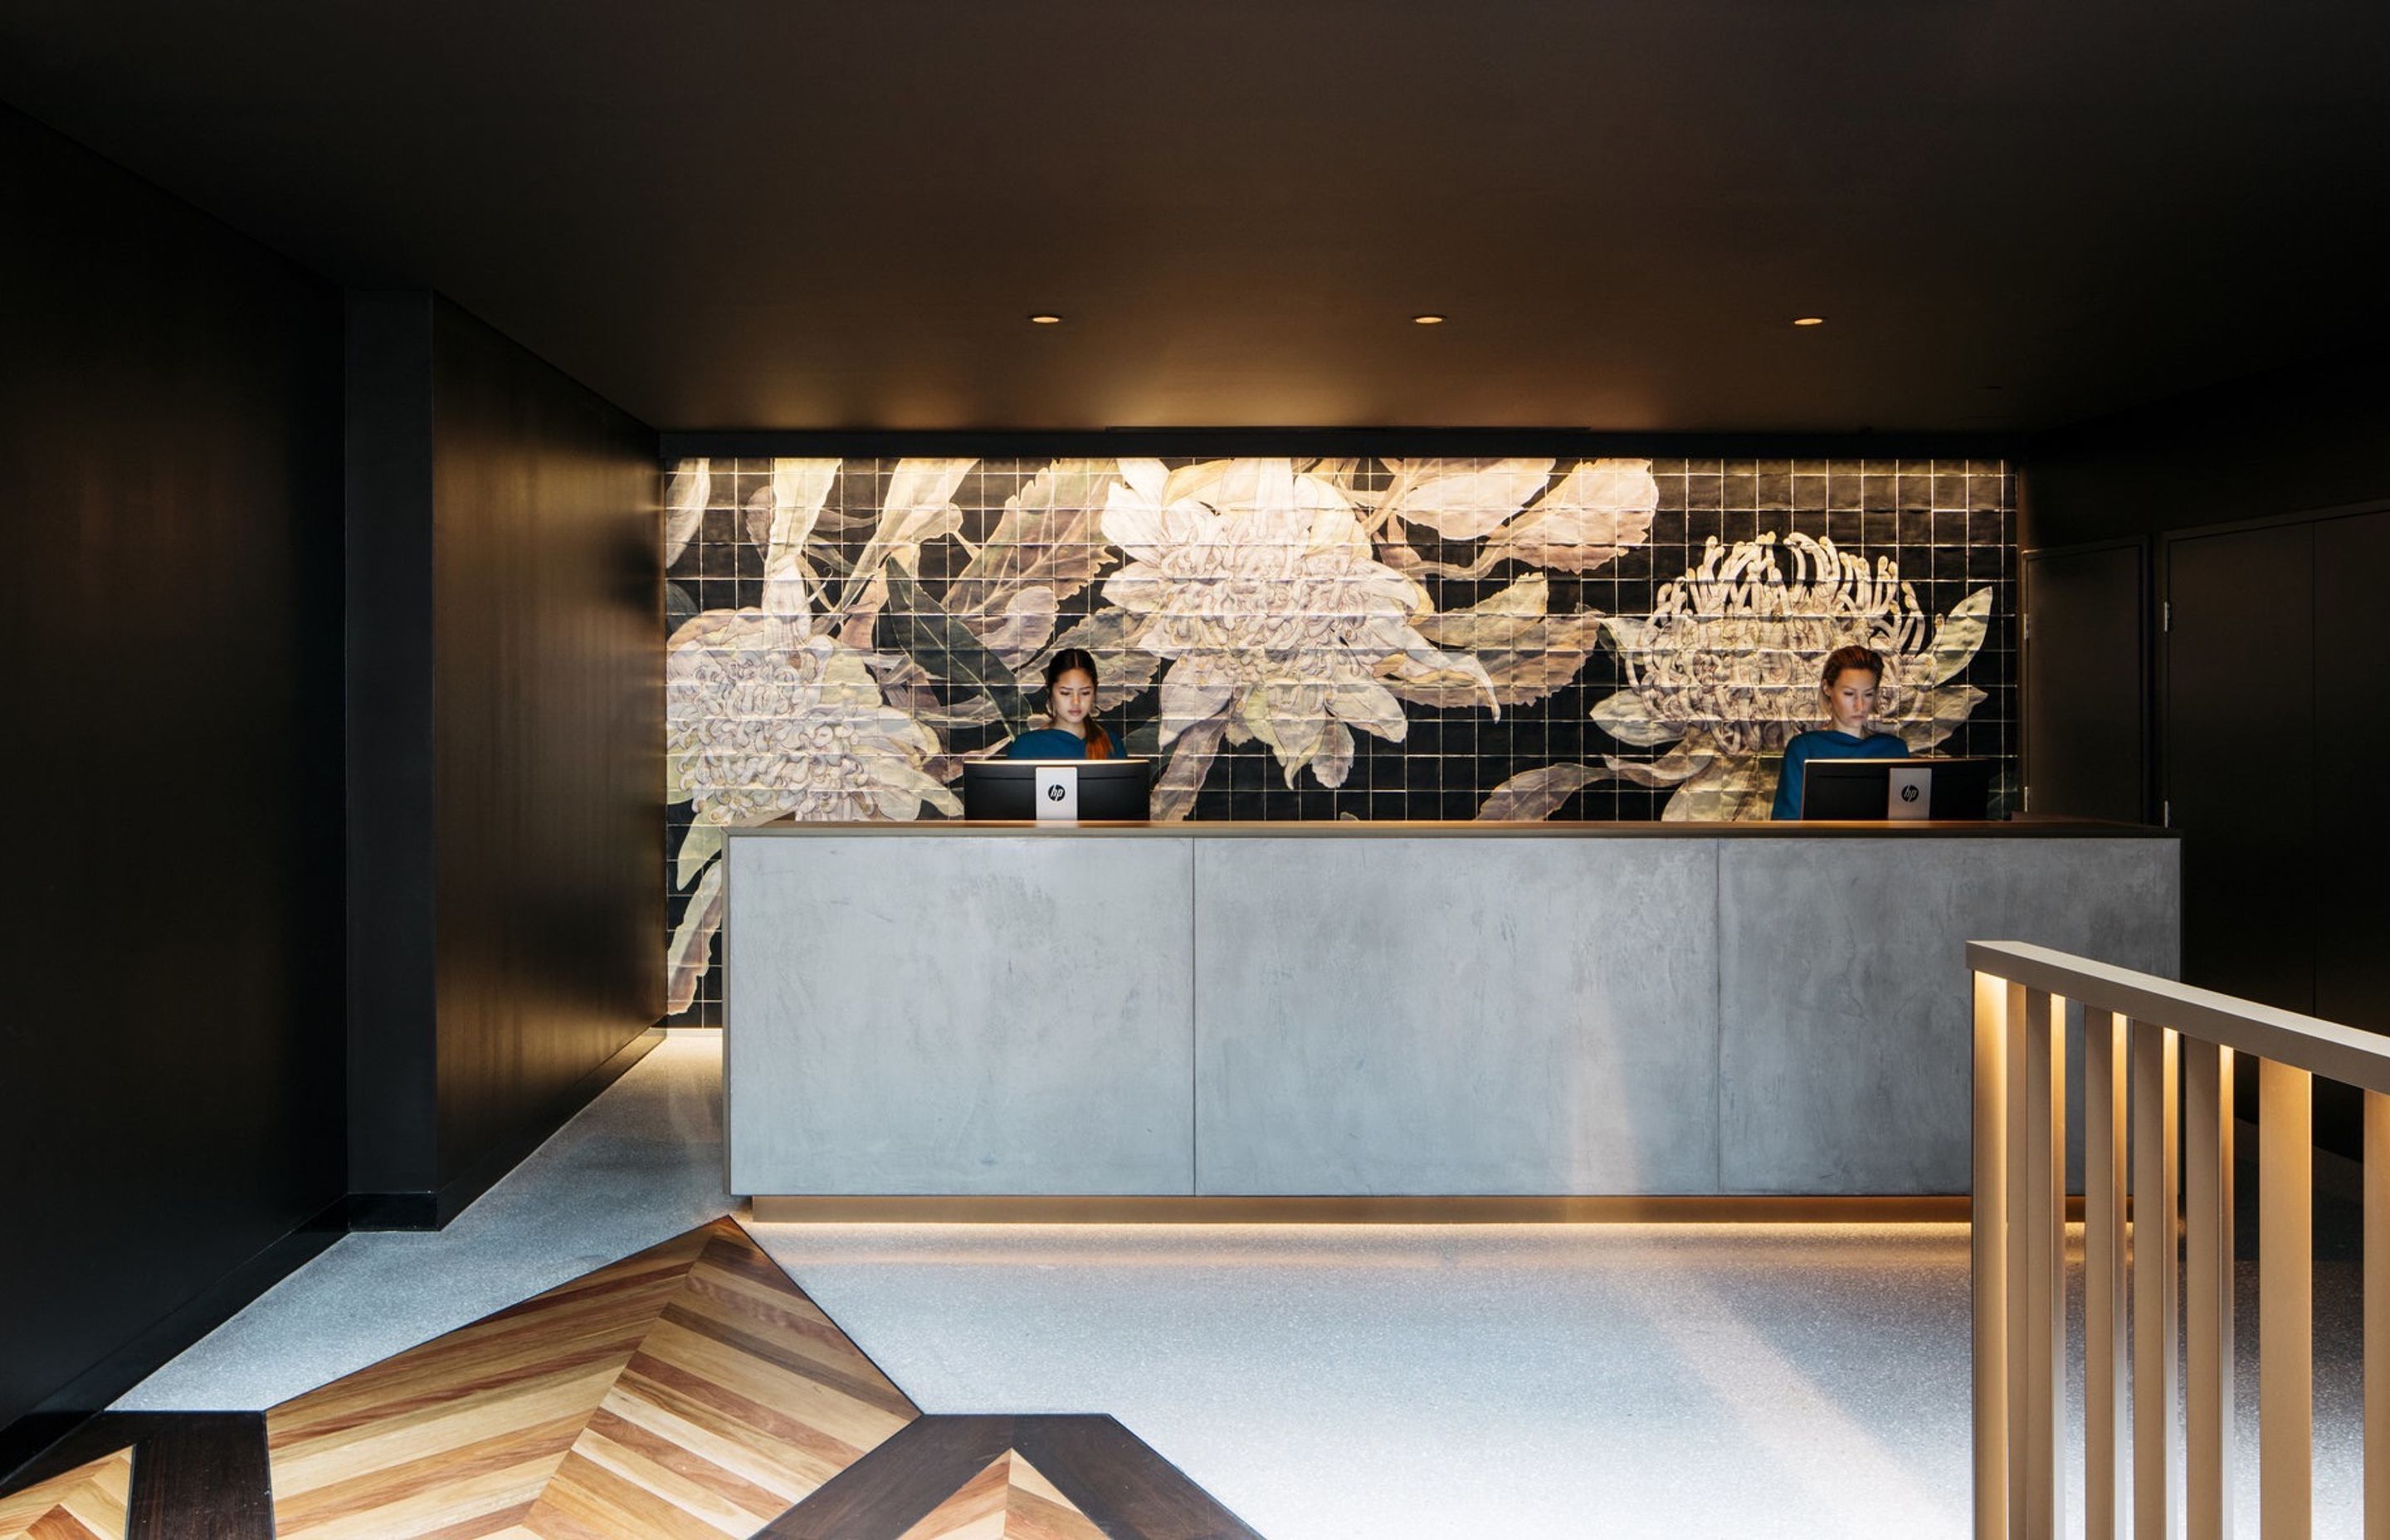 The immersive lobby features charcoal brickwork walls and a graphic timber floor of warm rich tones.